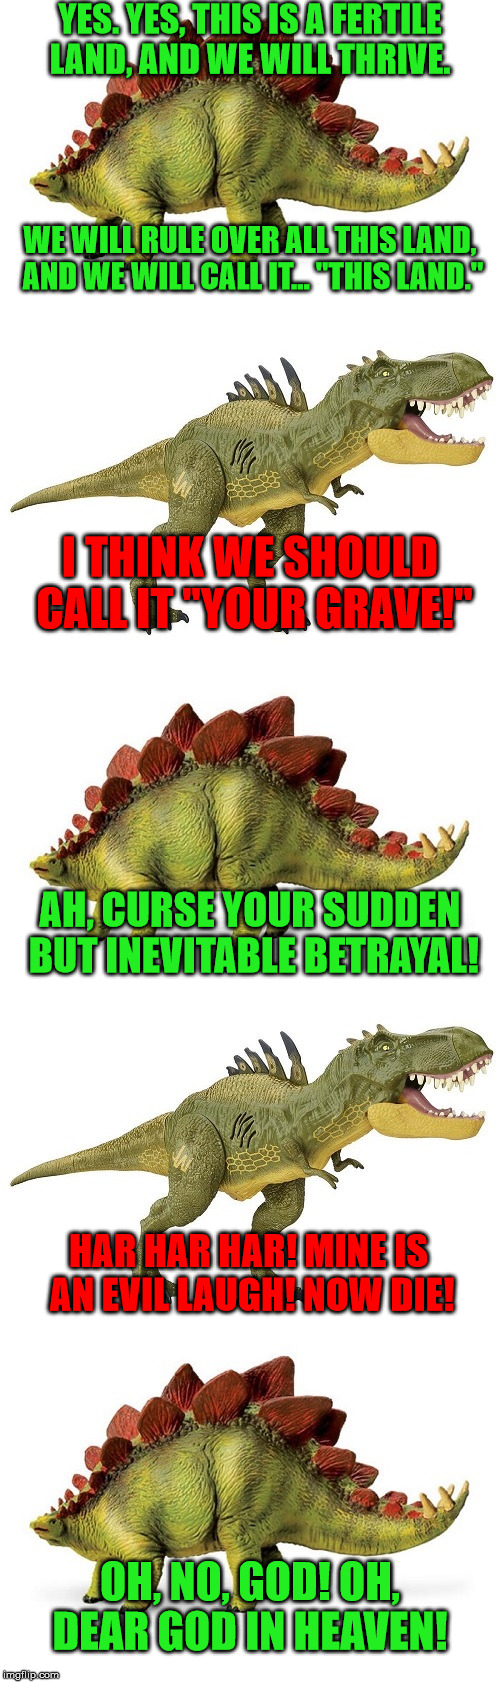 Curse your sudden but inevitable betrayal! | YES. YES, THIS IS A FERTILE LAND, AND WE WILL THRIVE. WE WILL RULE OVER ALL THIS LAND, AND WE WILL CALL IT... "THIS LAND."; I THINK WE SHOULD CALL IT "YOUR GRAVE!"; AH, CURSE YOUR SUDDEN BUT INEVITABLE BETRAYAL! HAR HAR HAR! MINE IS AN EVIL LAUGH! NOW DIE! OH, NO, GOD! OH, DEAR GOD IN HEAVEN! | image tagged in firefly,betrayal,fox betrayed us all,serenity,hoban washburne,dinosaur toys | made w/ Imgflip meme maker